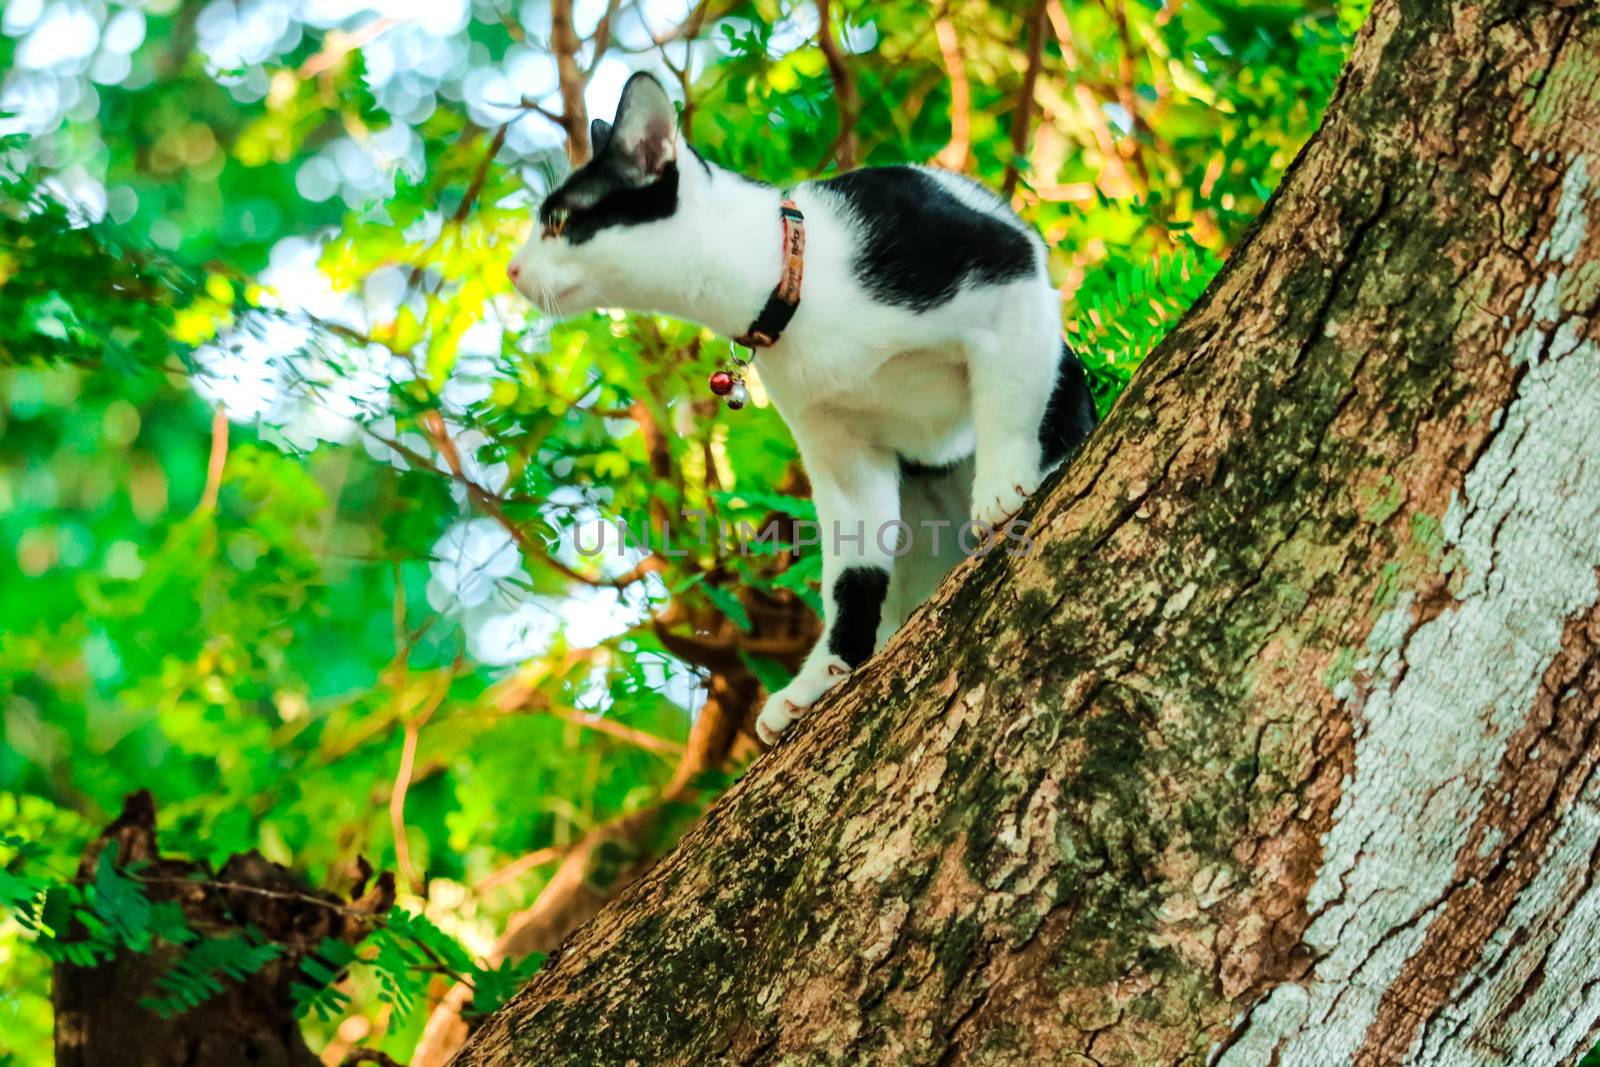 Siamese cats climb trees to catch squirrels. But it can not climb down,they are Looking for someone to help it down